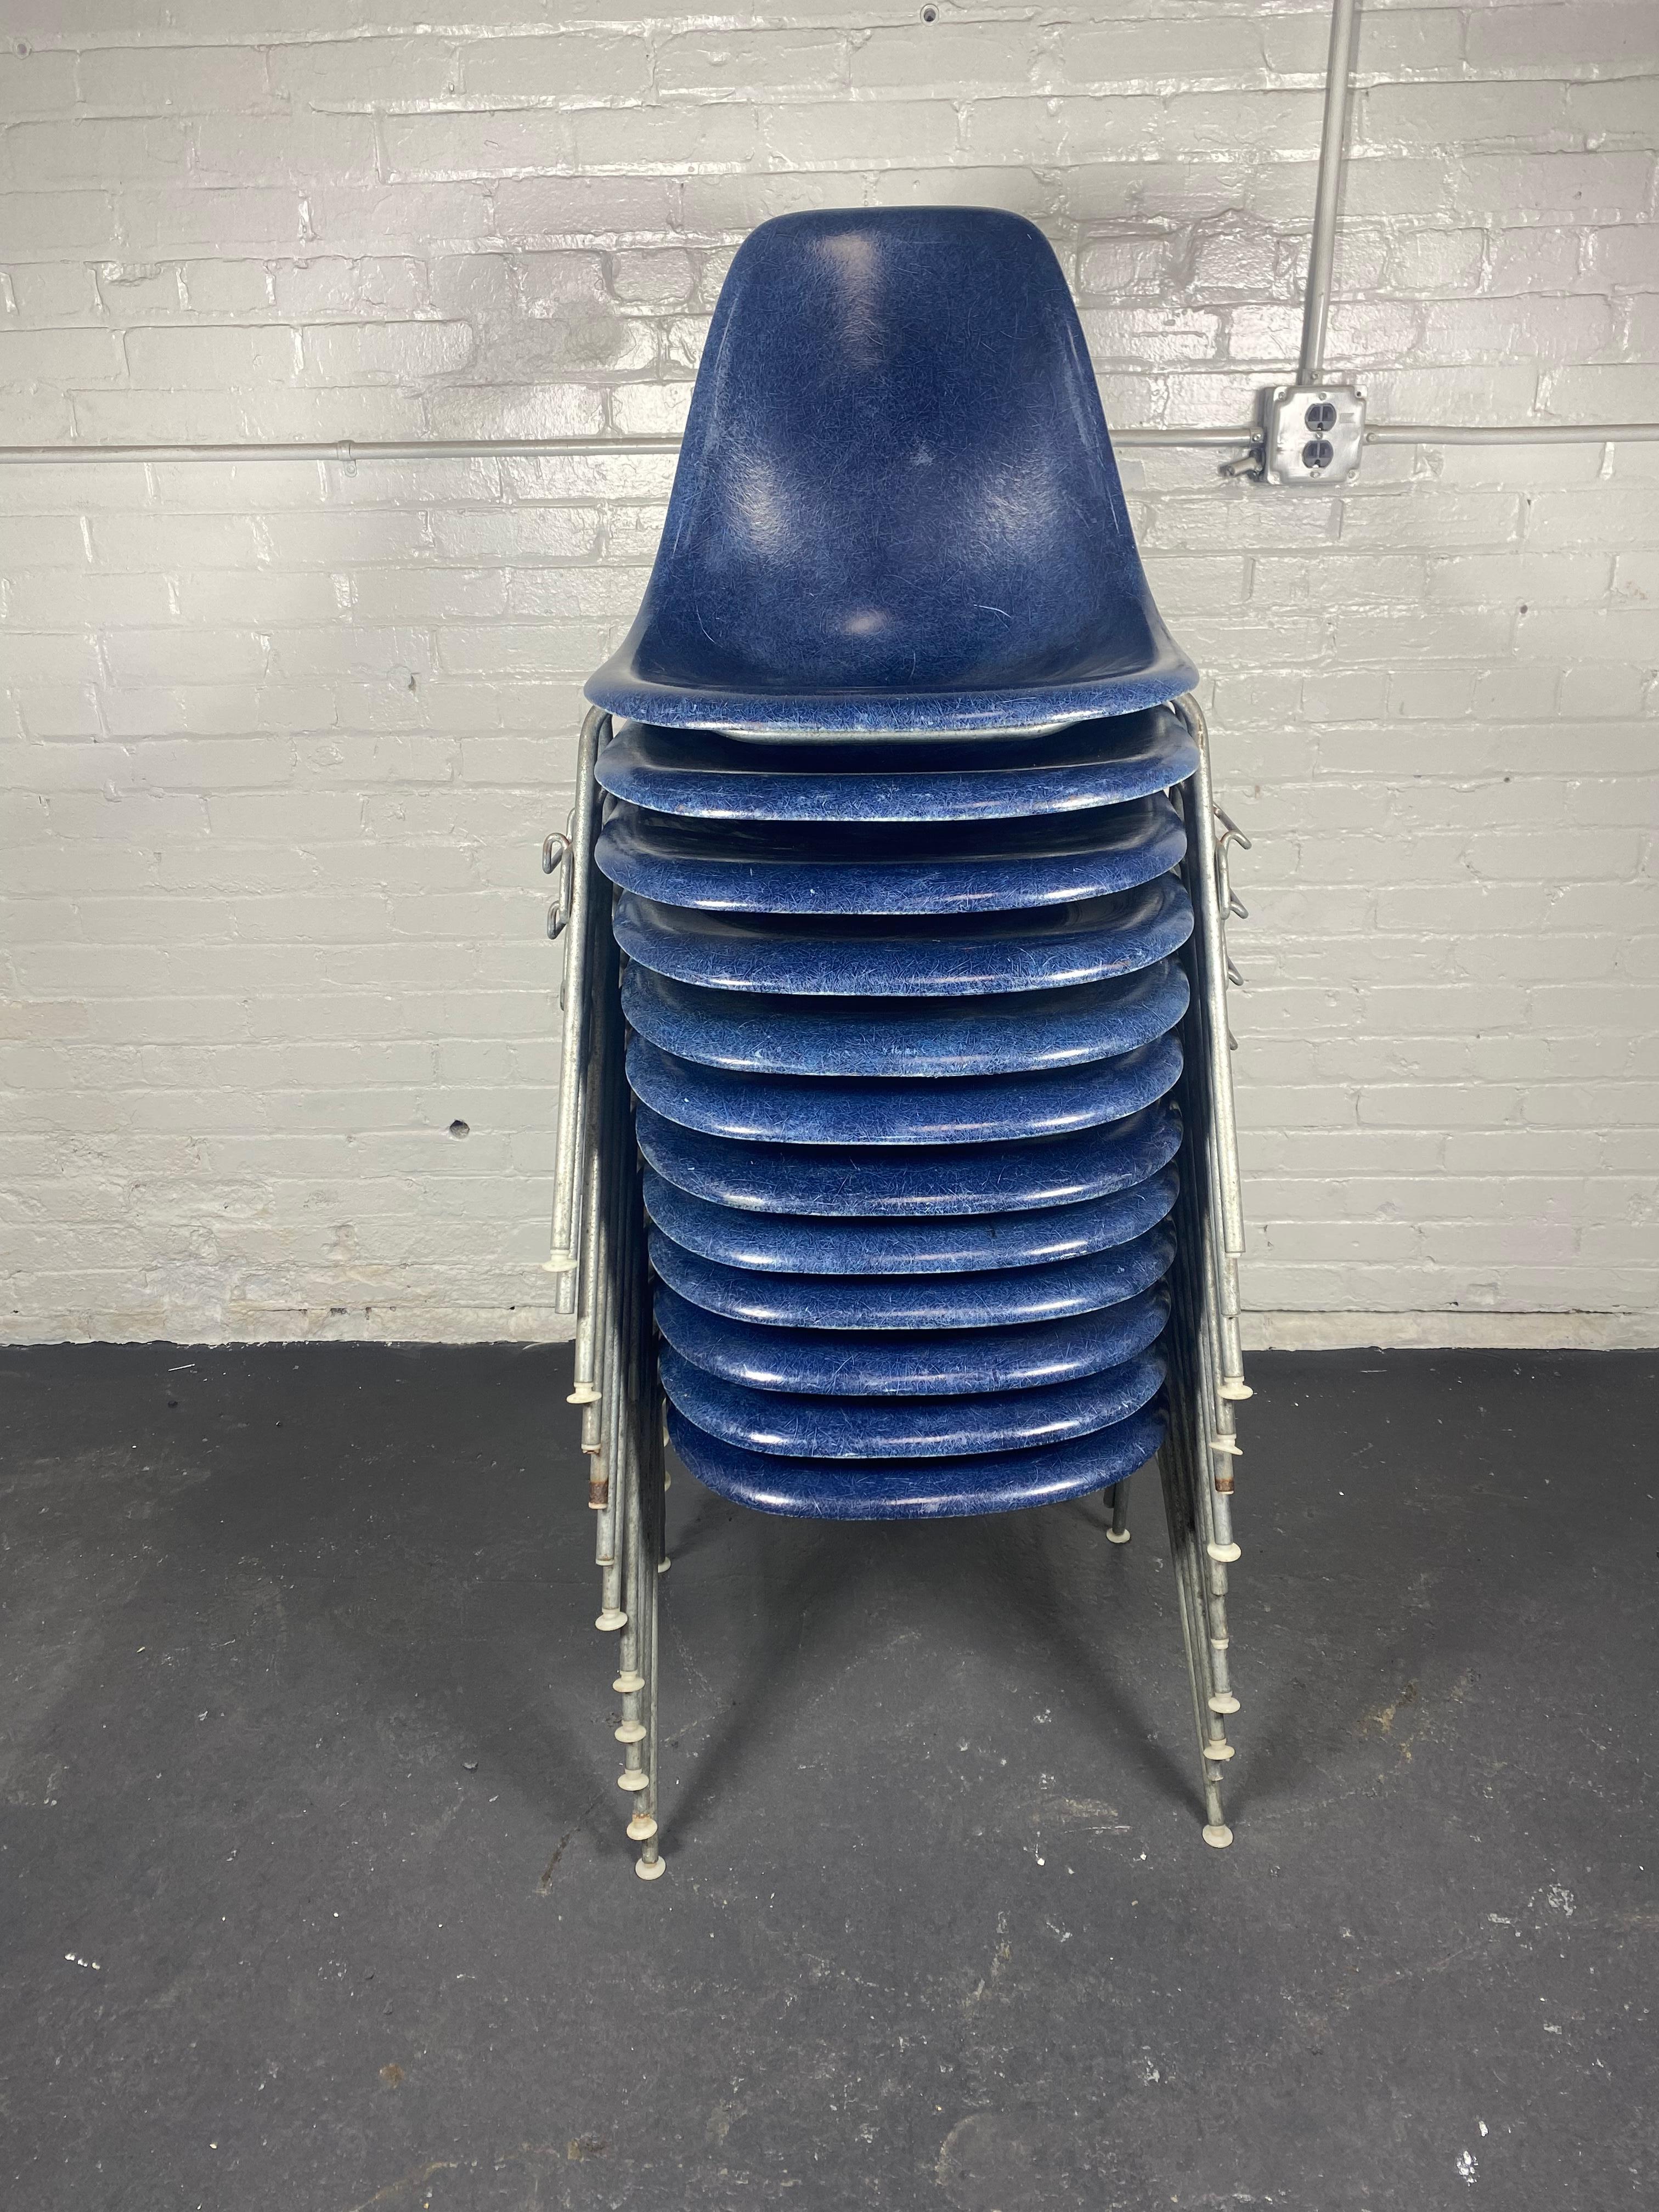 12 DSS Stacking Chairs Charles & Ray Eames Herman Miller, Blue Fiberglass, 1960s For Sale 1